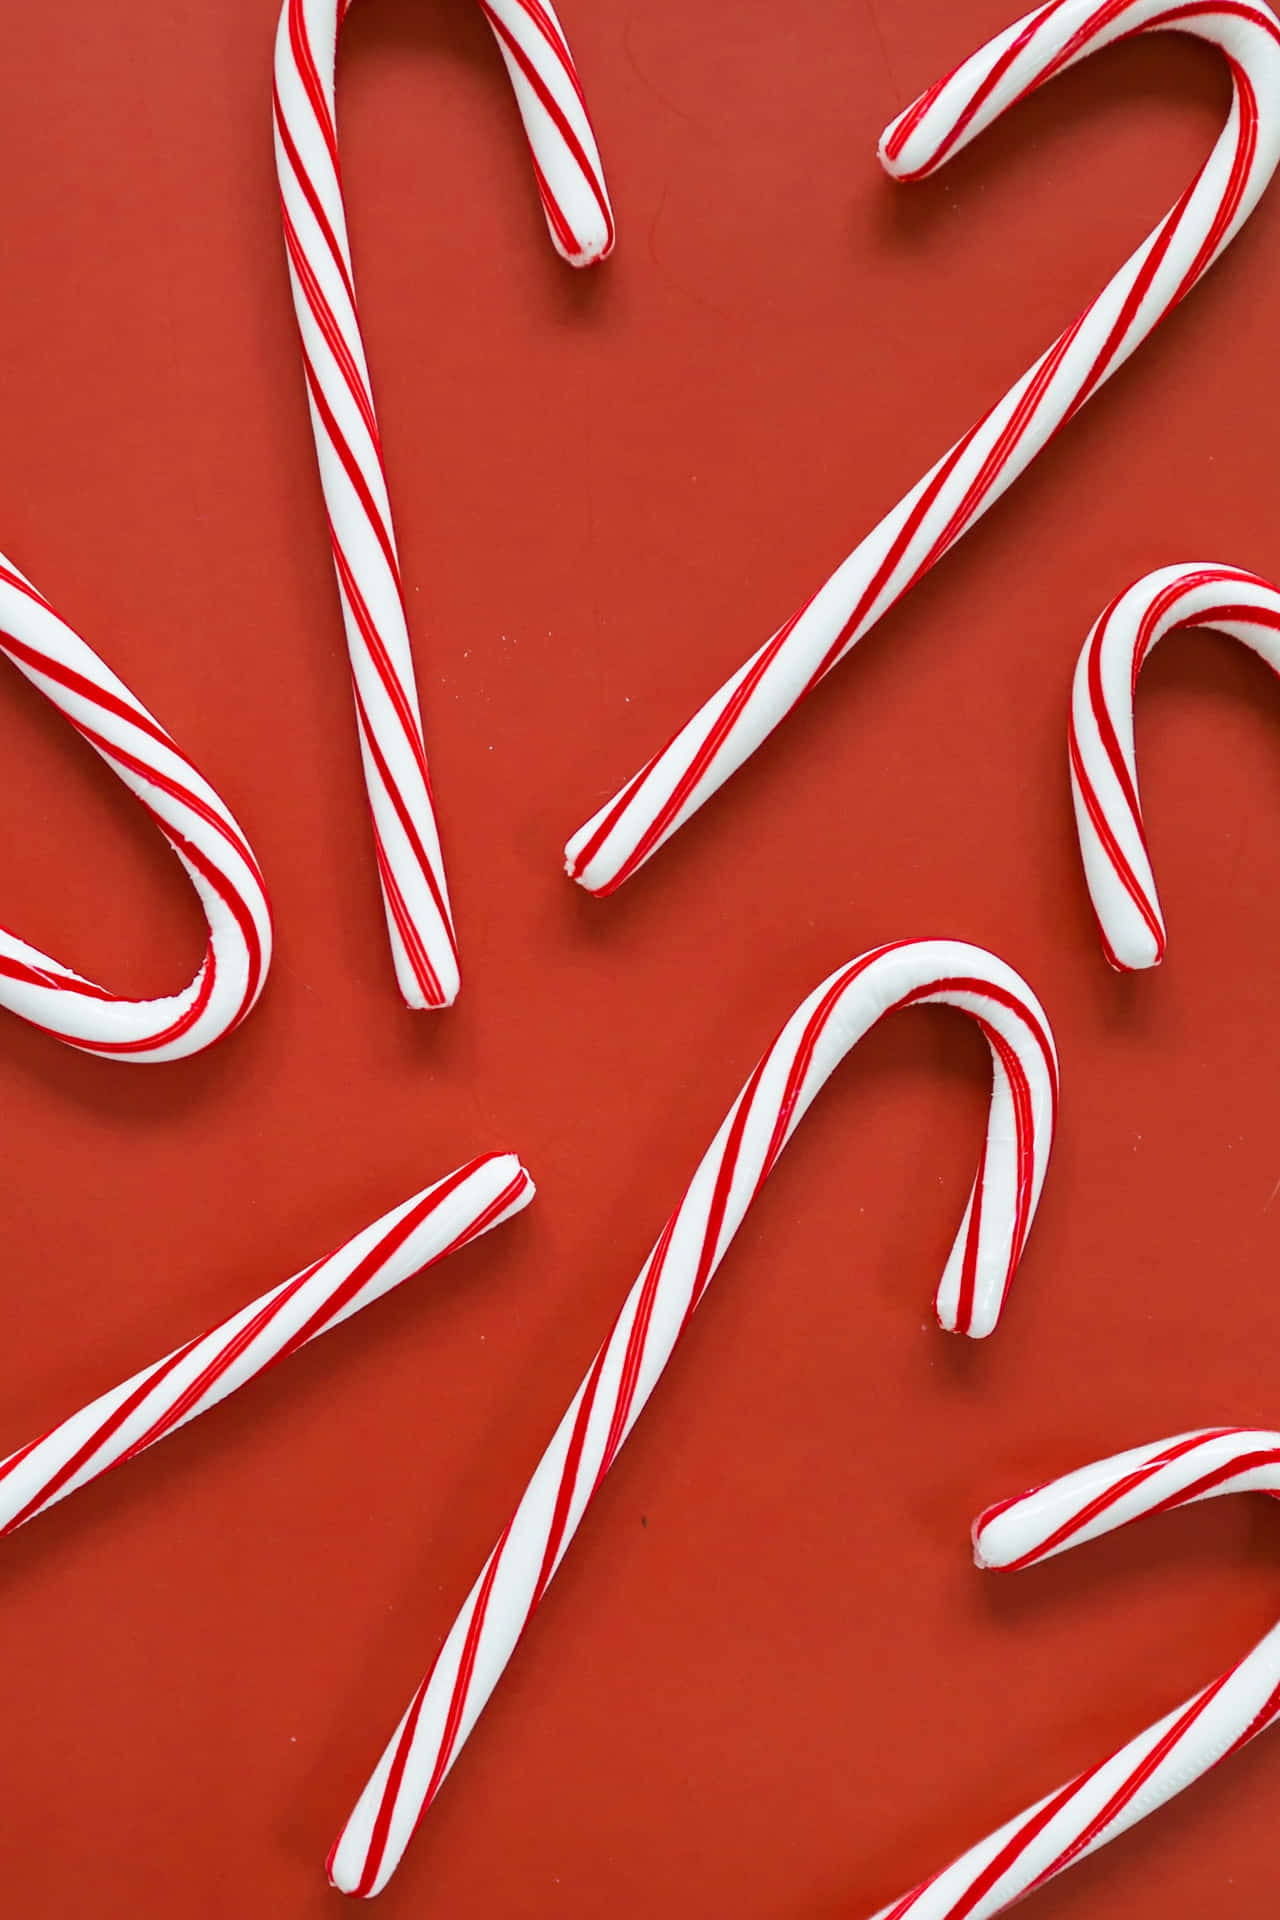 High Definition Candy Cane Christmas Background